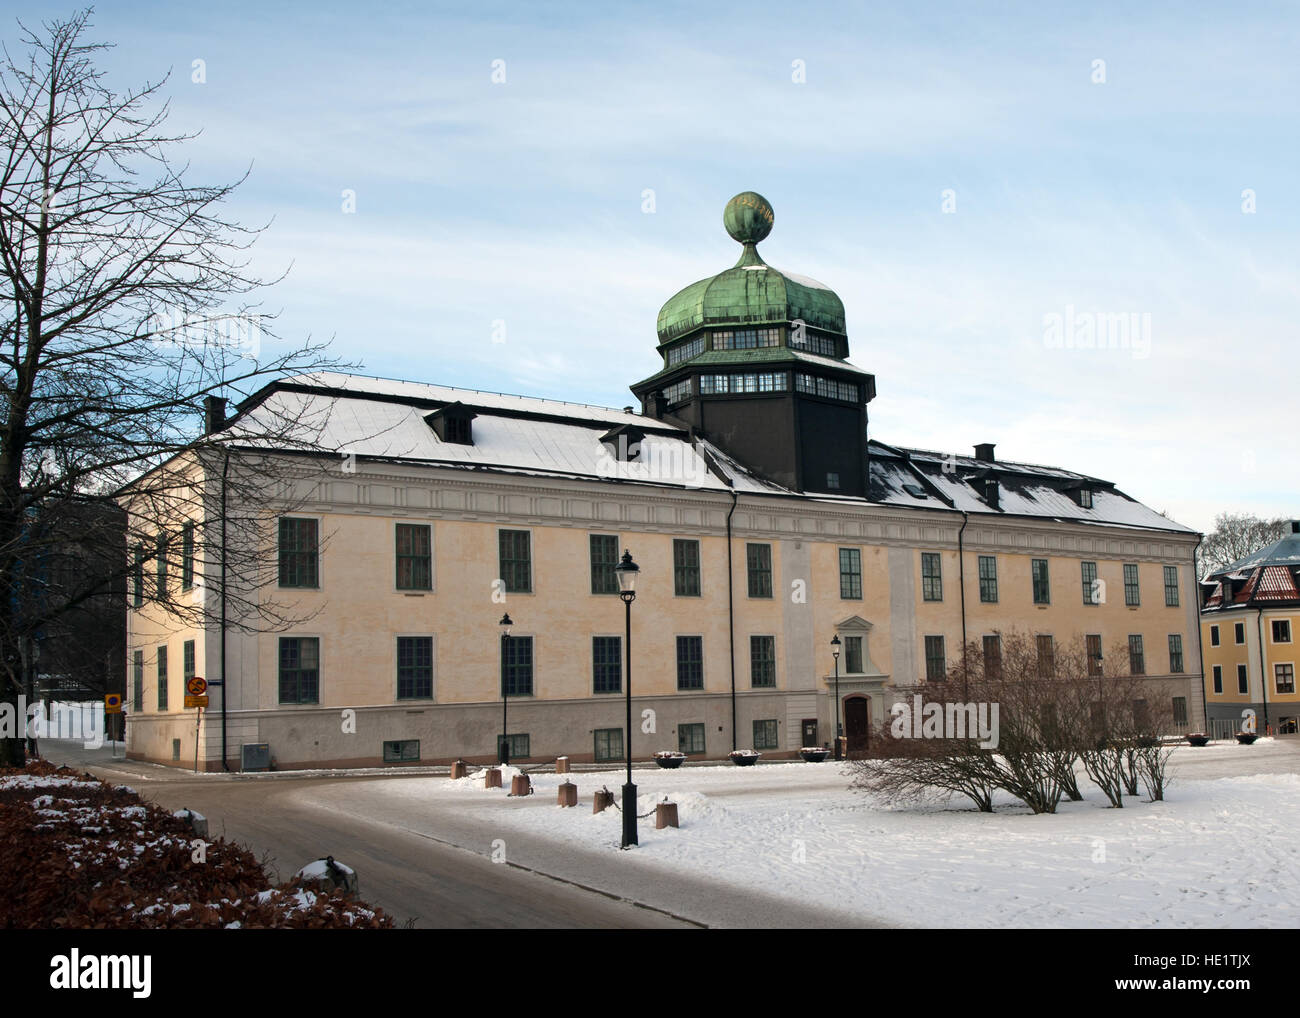 Gustavianum is a historical building from 1620 with an anatomical theater on the roof in Uppsala, Sweden Stock Photo